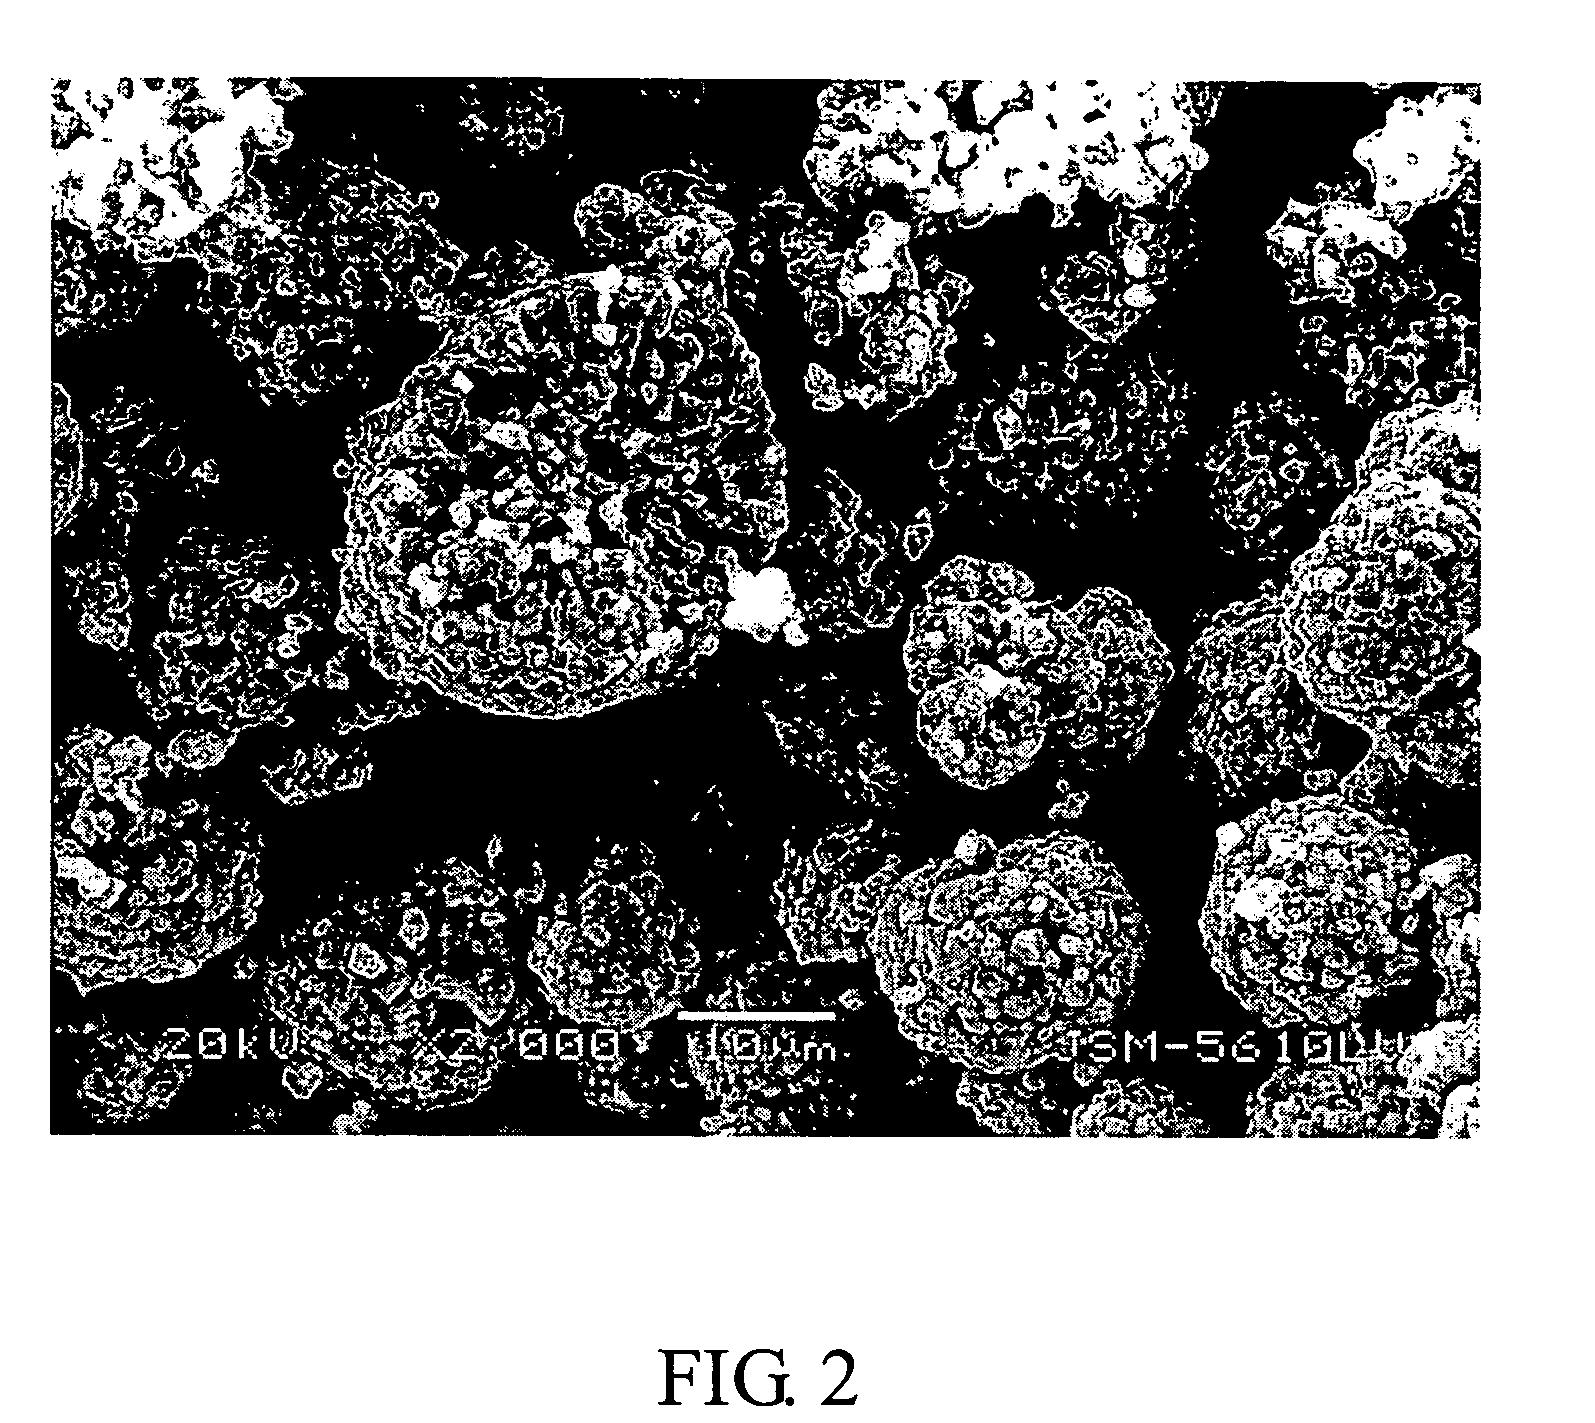 Compounds of lithium nickel cobalt metal oxide and the methods of their fabrication